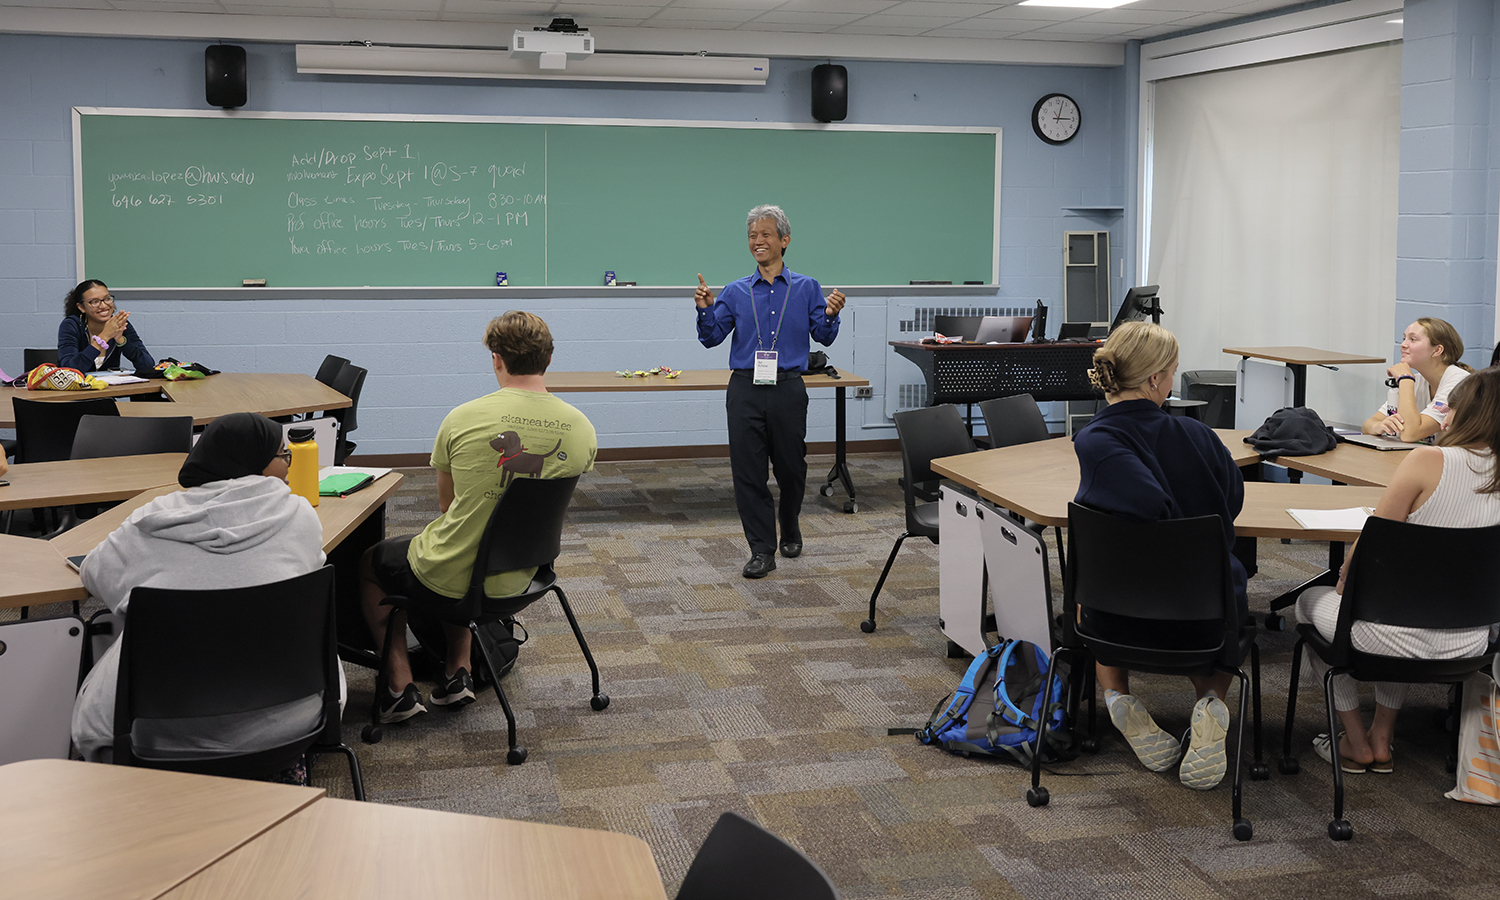 Associate Professor of Religious Studies Shalahudin Kafrawi meets with students in “Encountering Difference.”